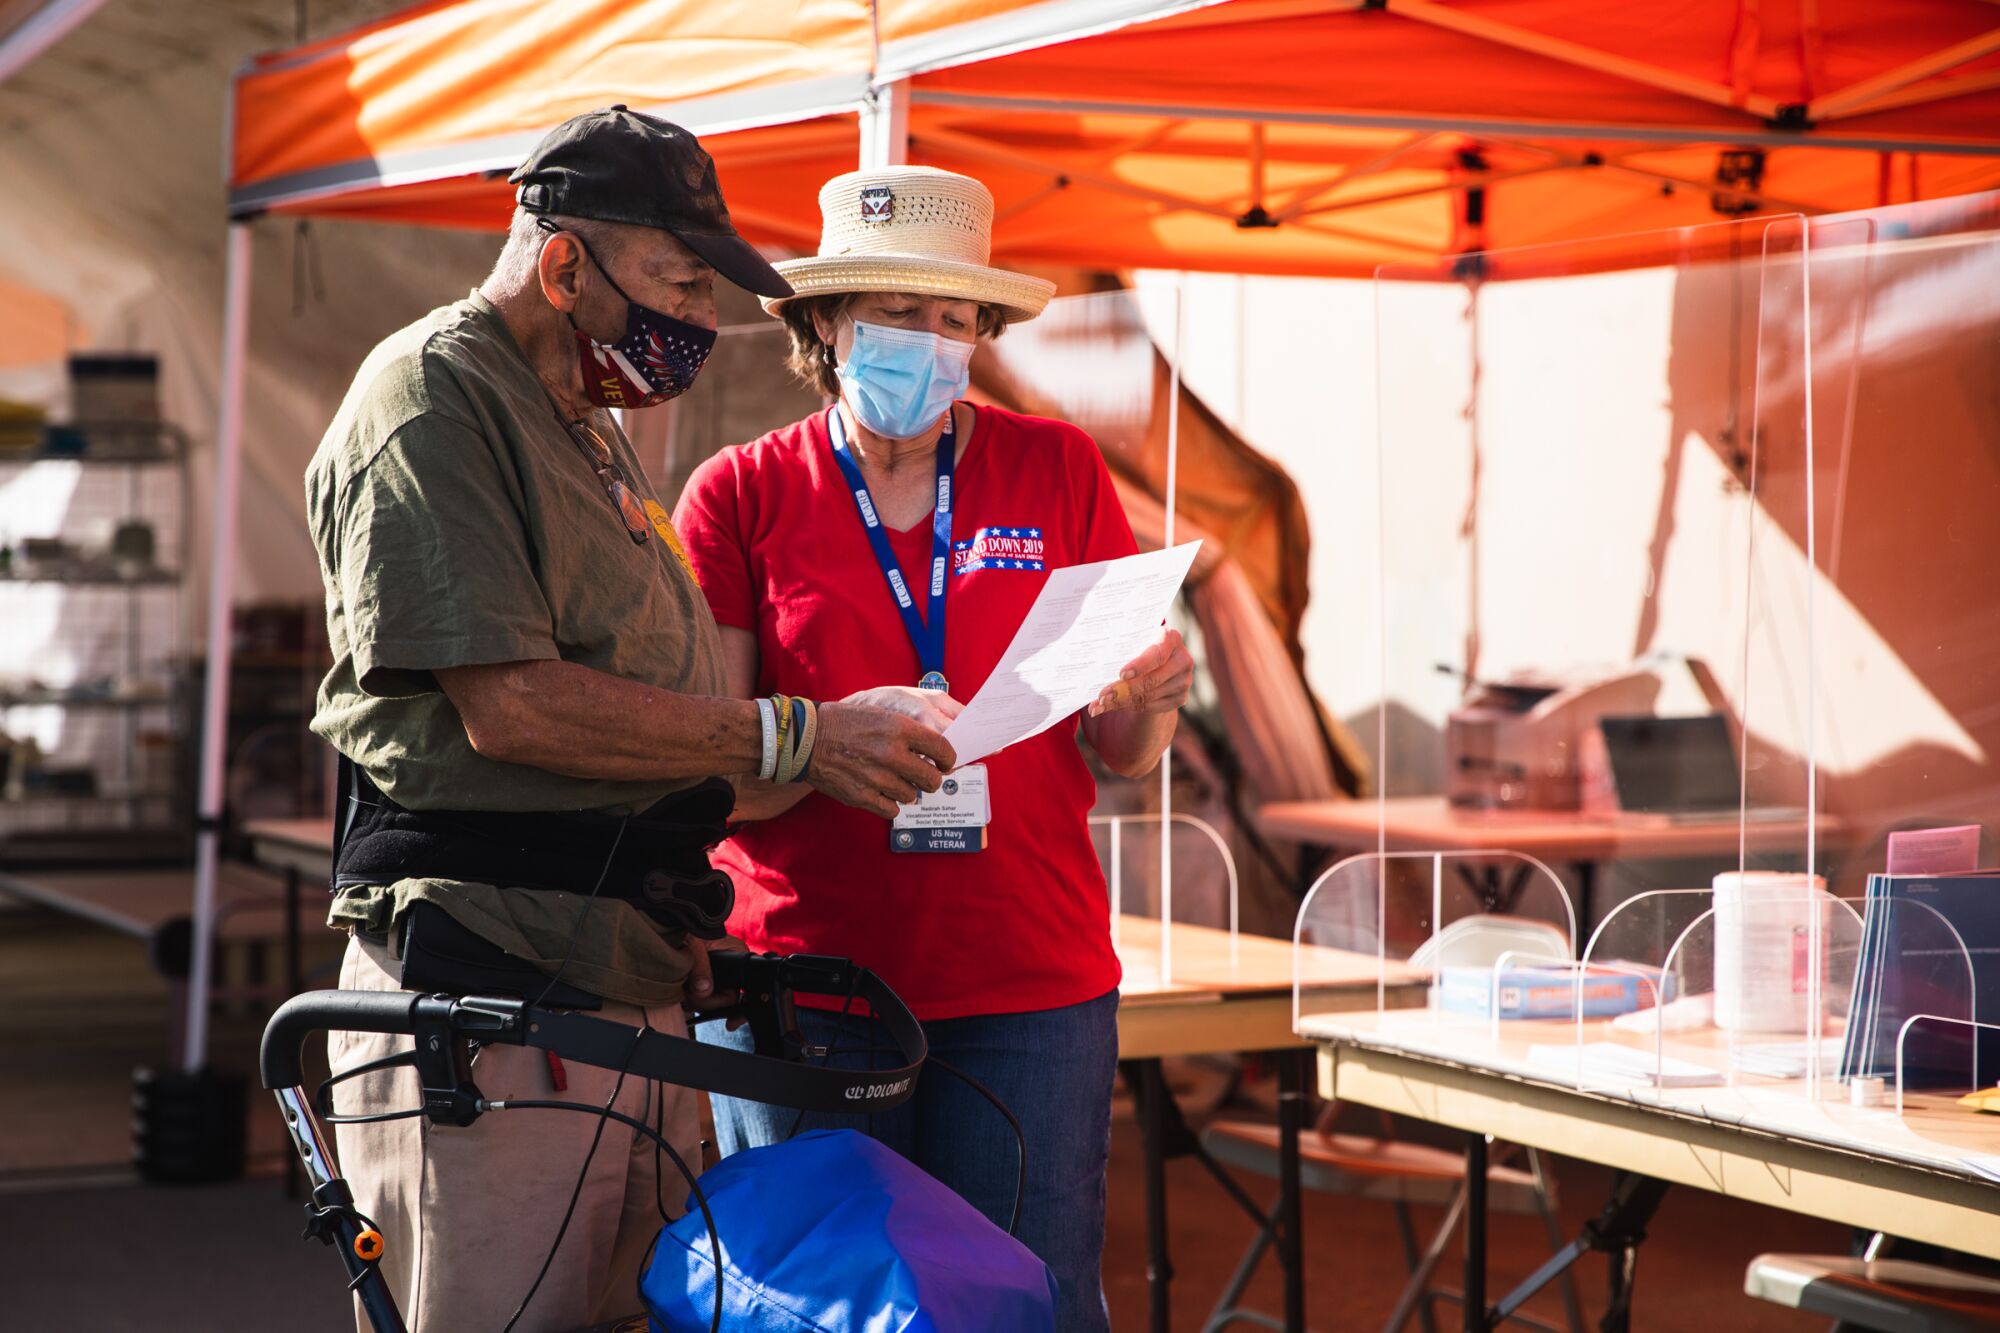 Nadirah Sahar (right) guides U.S. Marine veteran Ray Gomez to find potential employment during the “Stand Down” event.